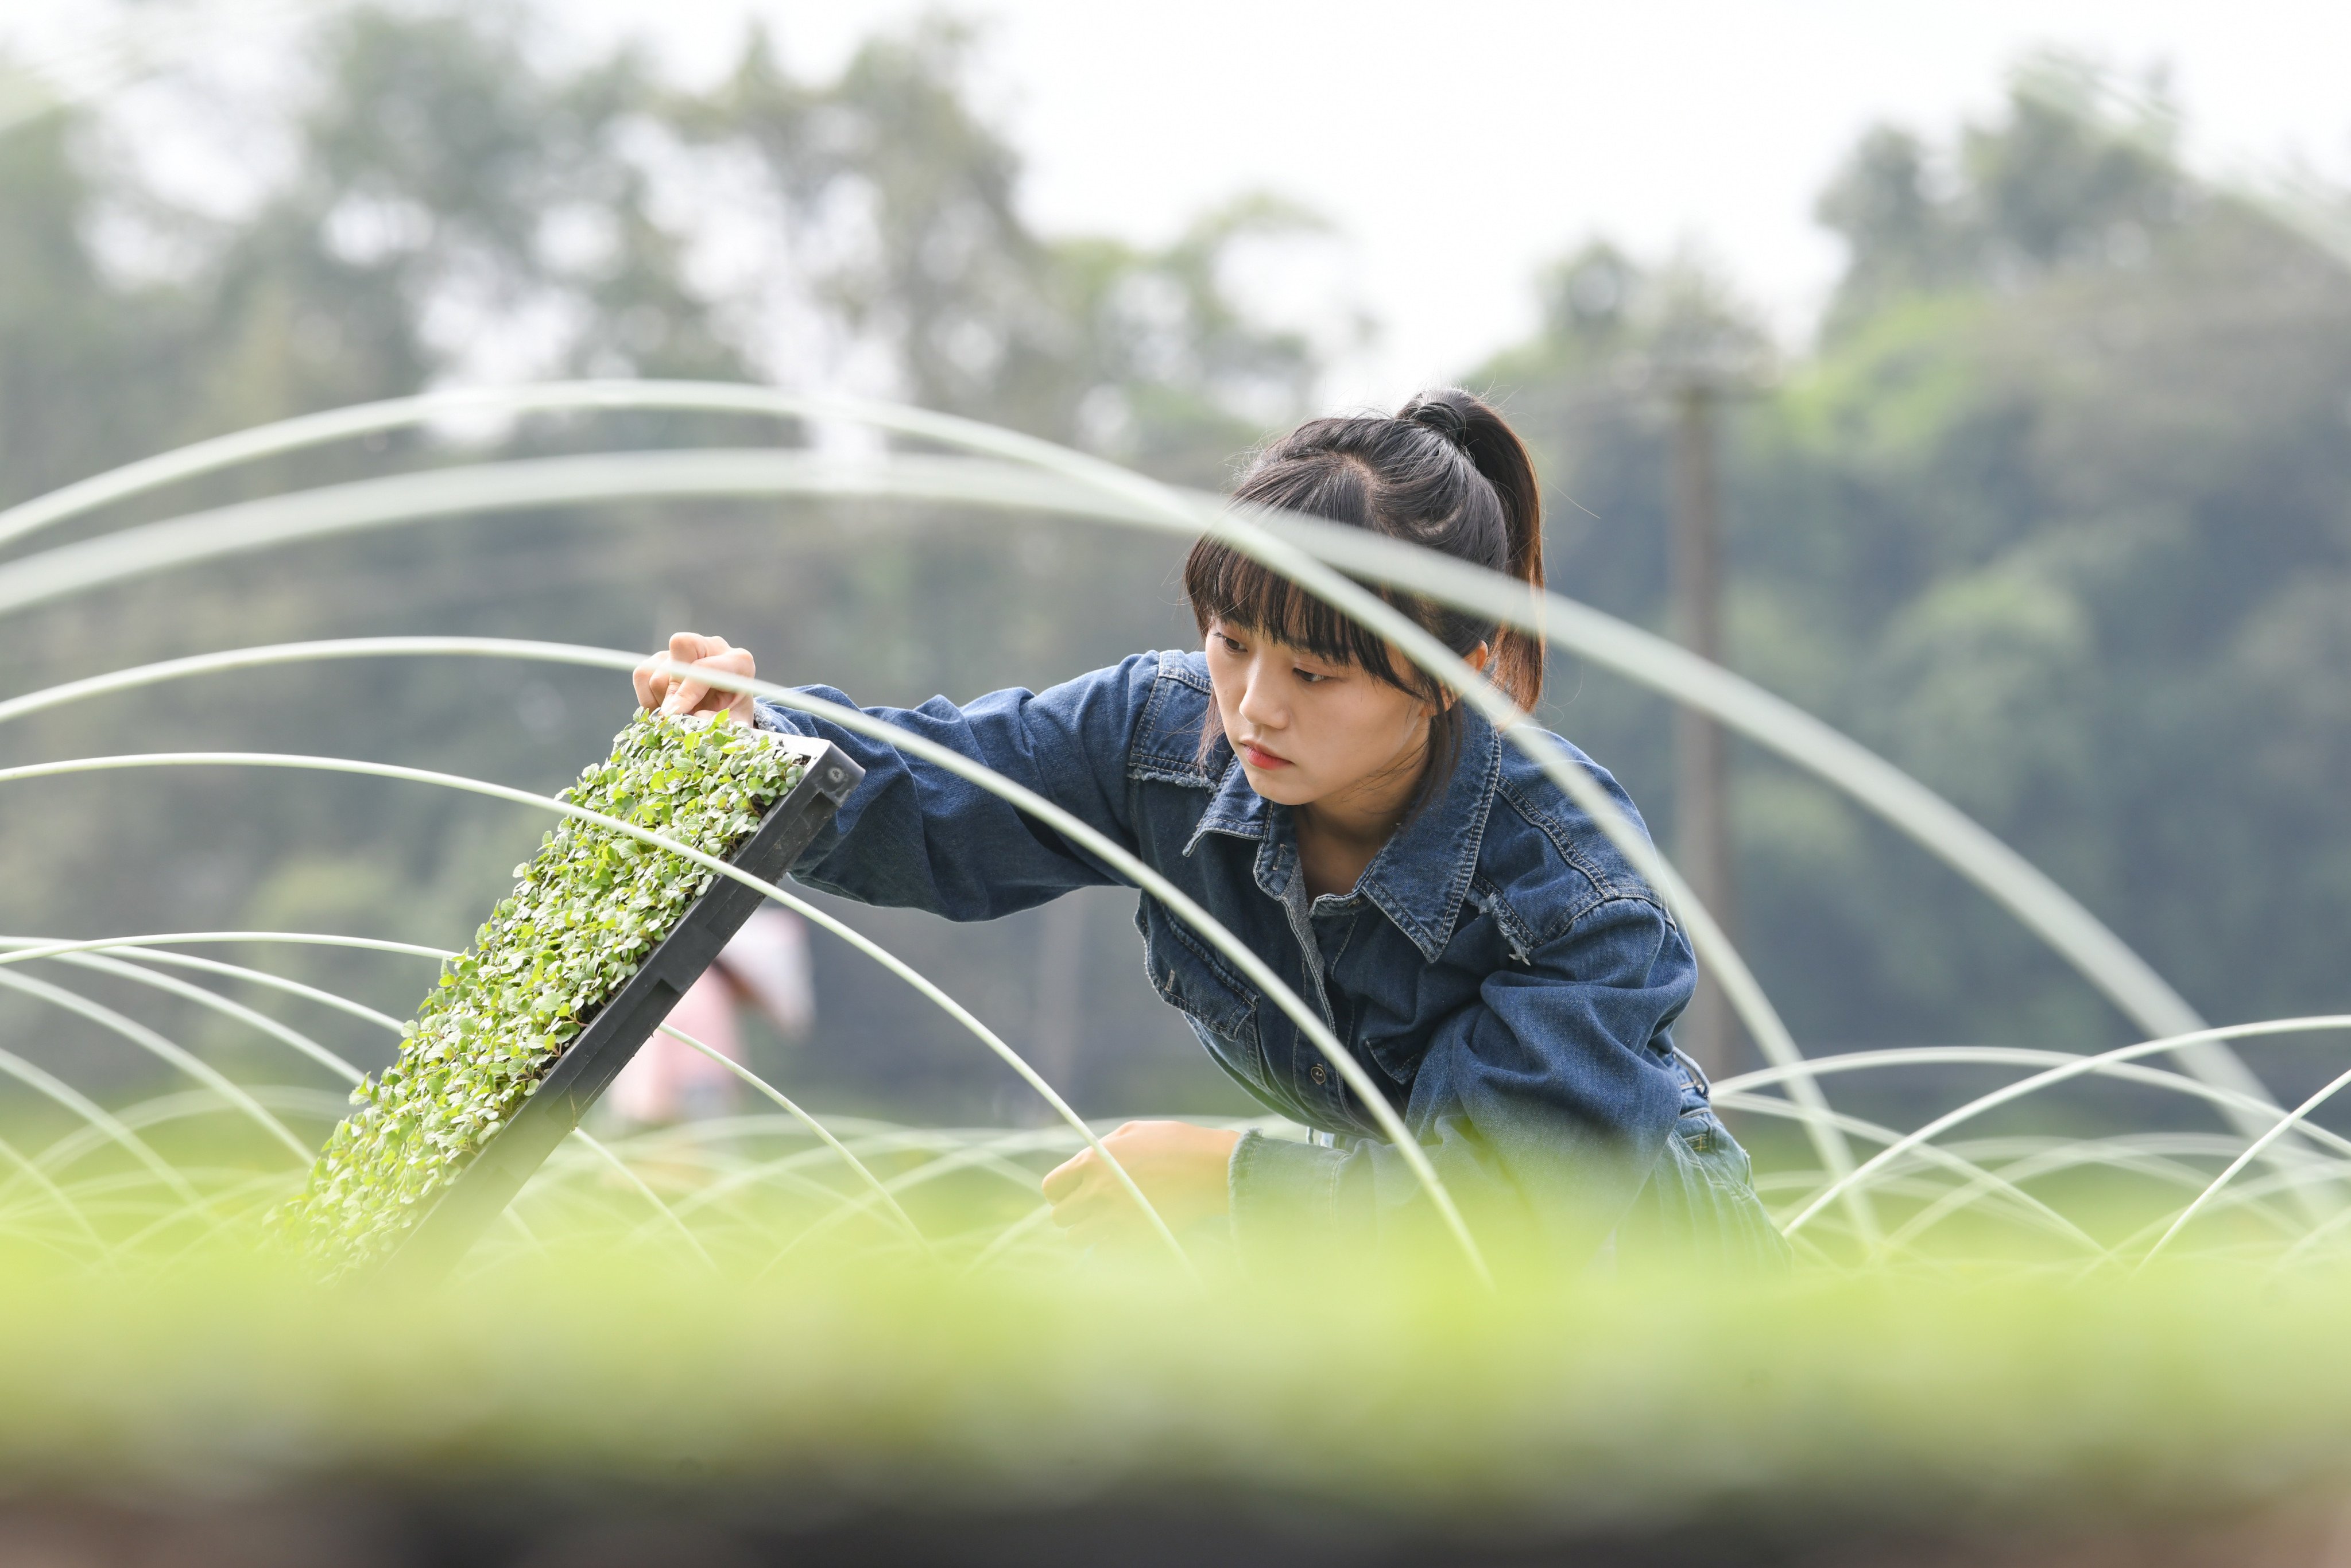 Wang Lingli, a new-generation farmer who moved back to her hometown to farm in 2015, checks the condition of rapeseed in Longxing township of Chengdu, Sichuan, on October 10. China’s young people are increasingly leaving the biggest cities in search of affordable housing and a more balanced lifestyle. Photo: Xinhua